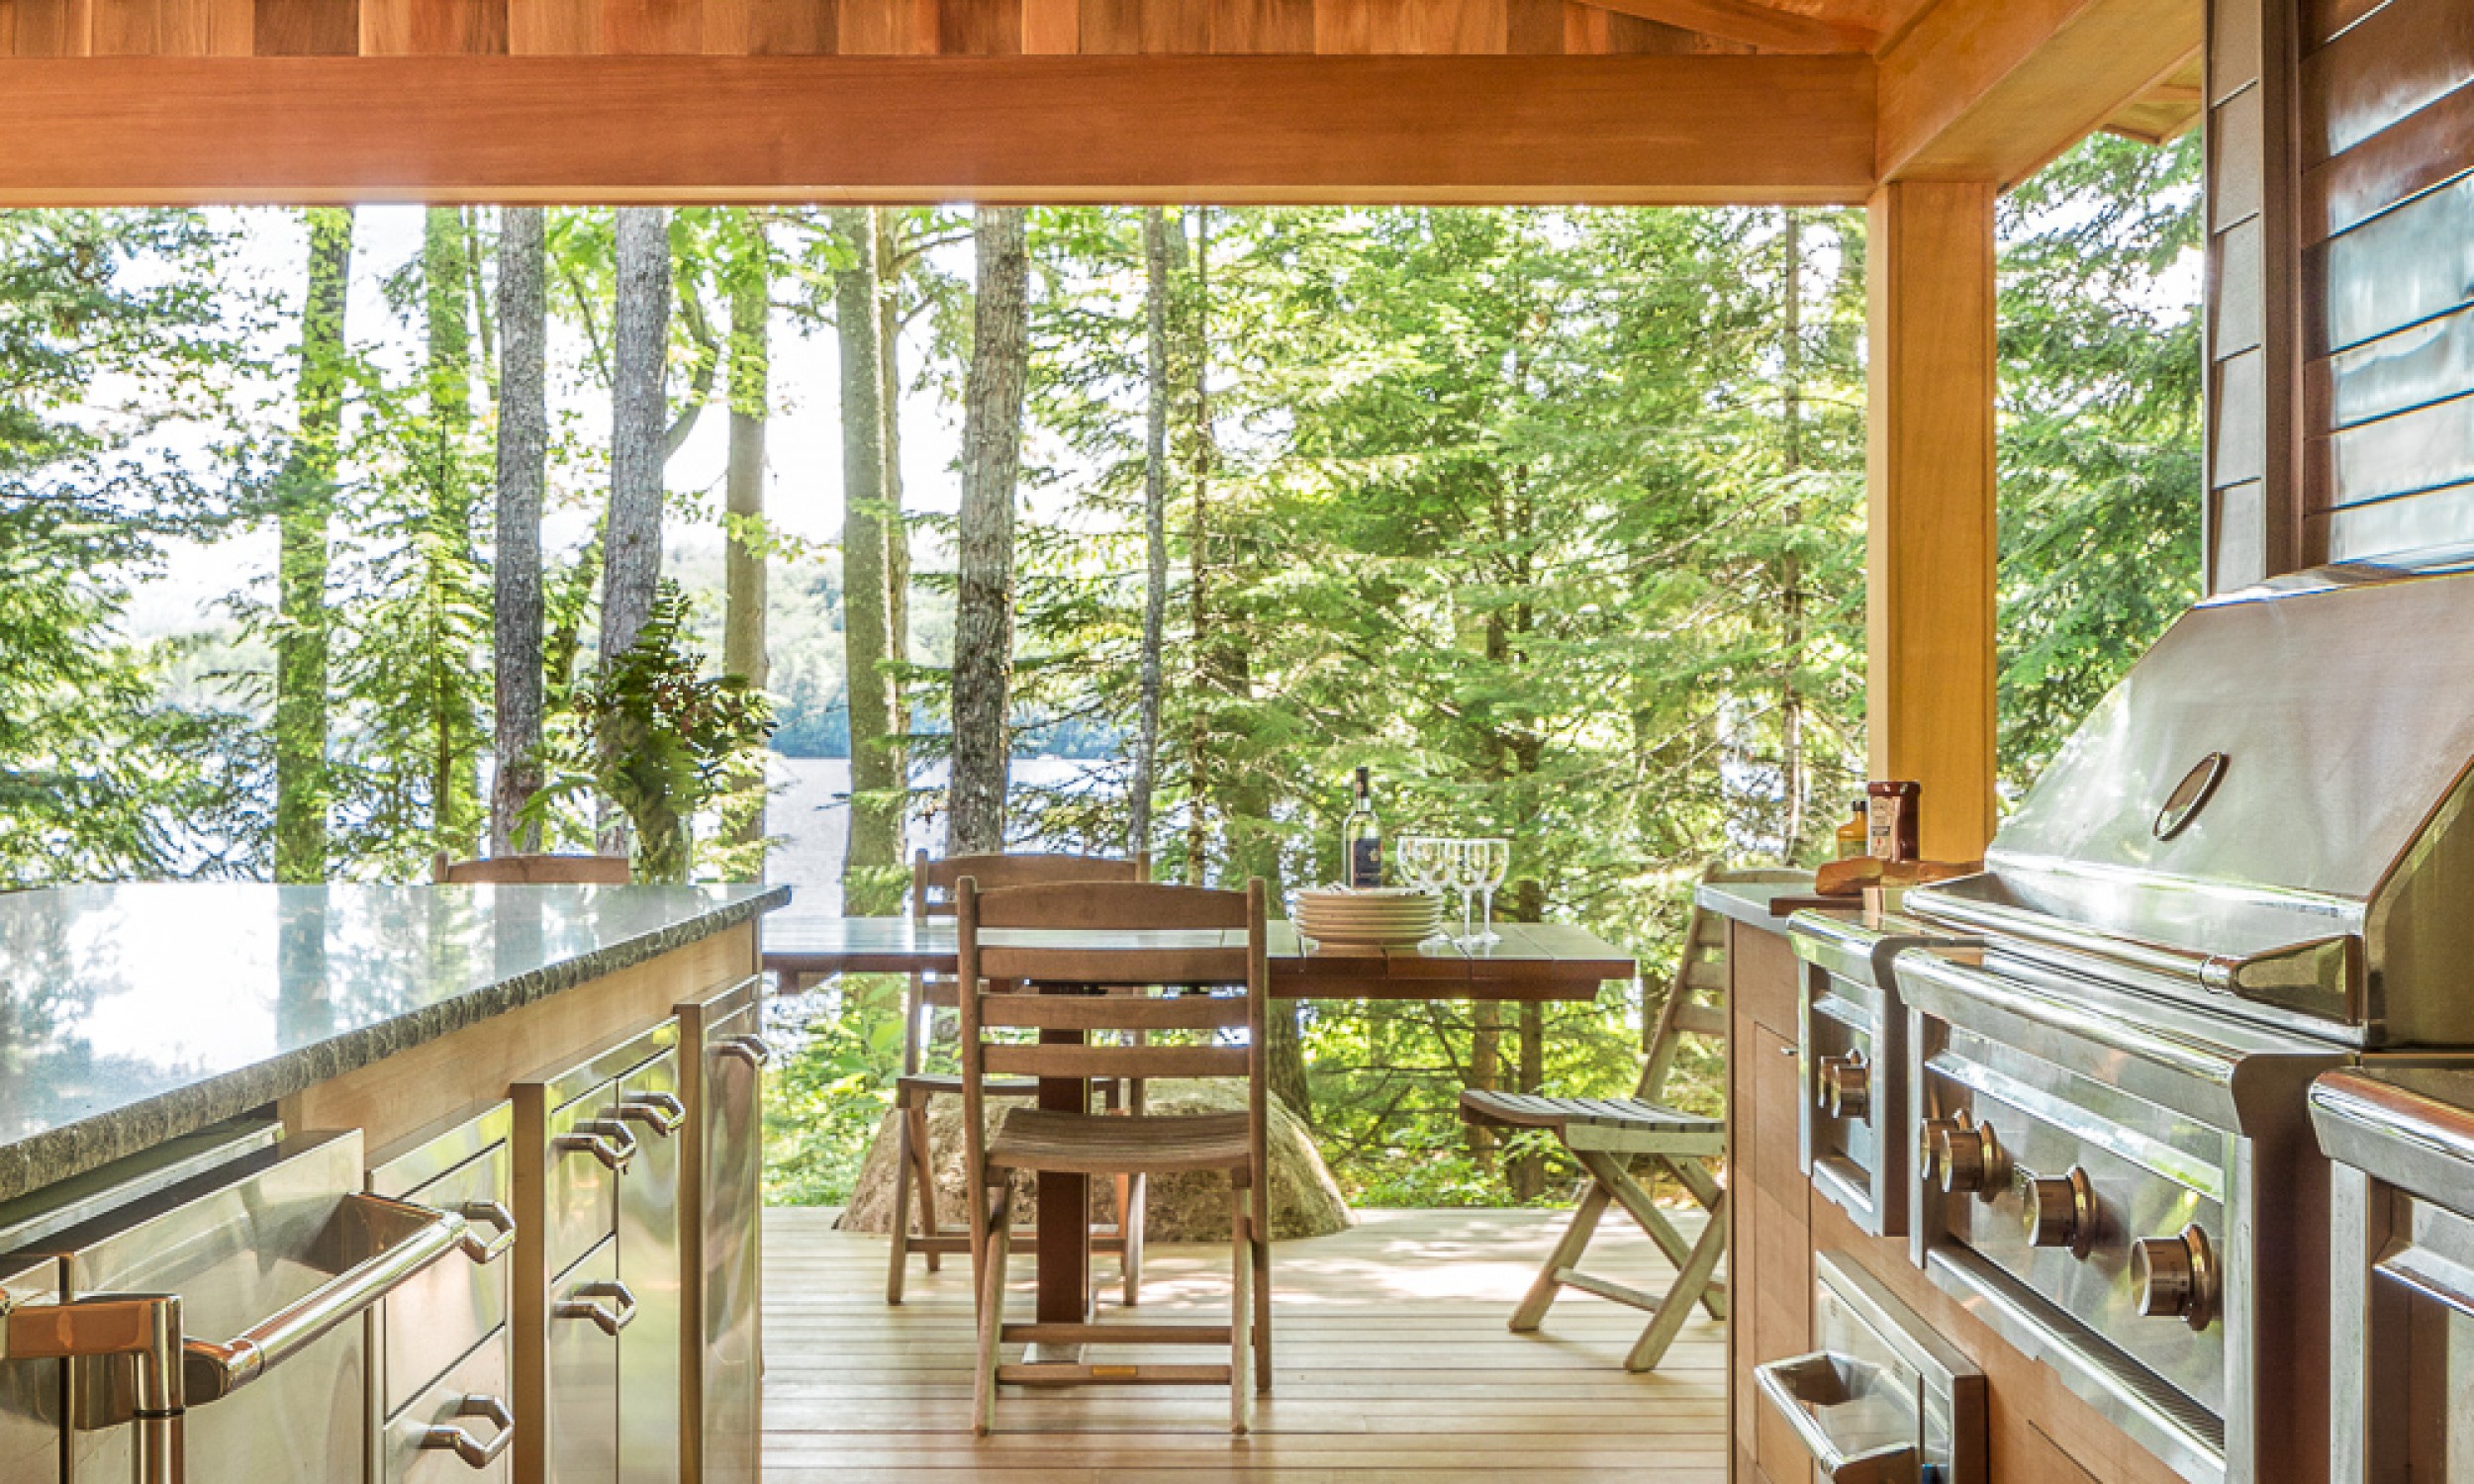 Lynx grill, cedar finishes, ipe decking, maine architect, new england architecture